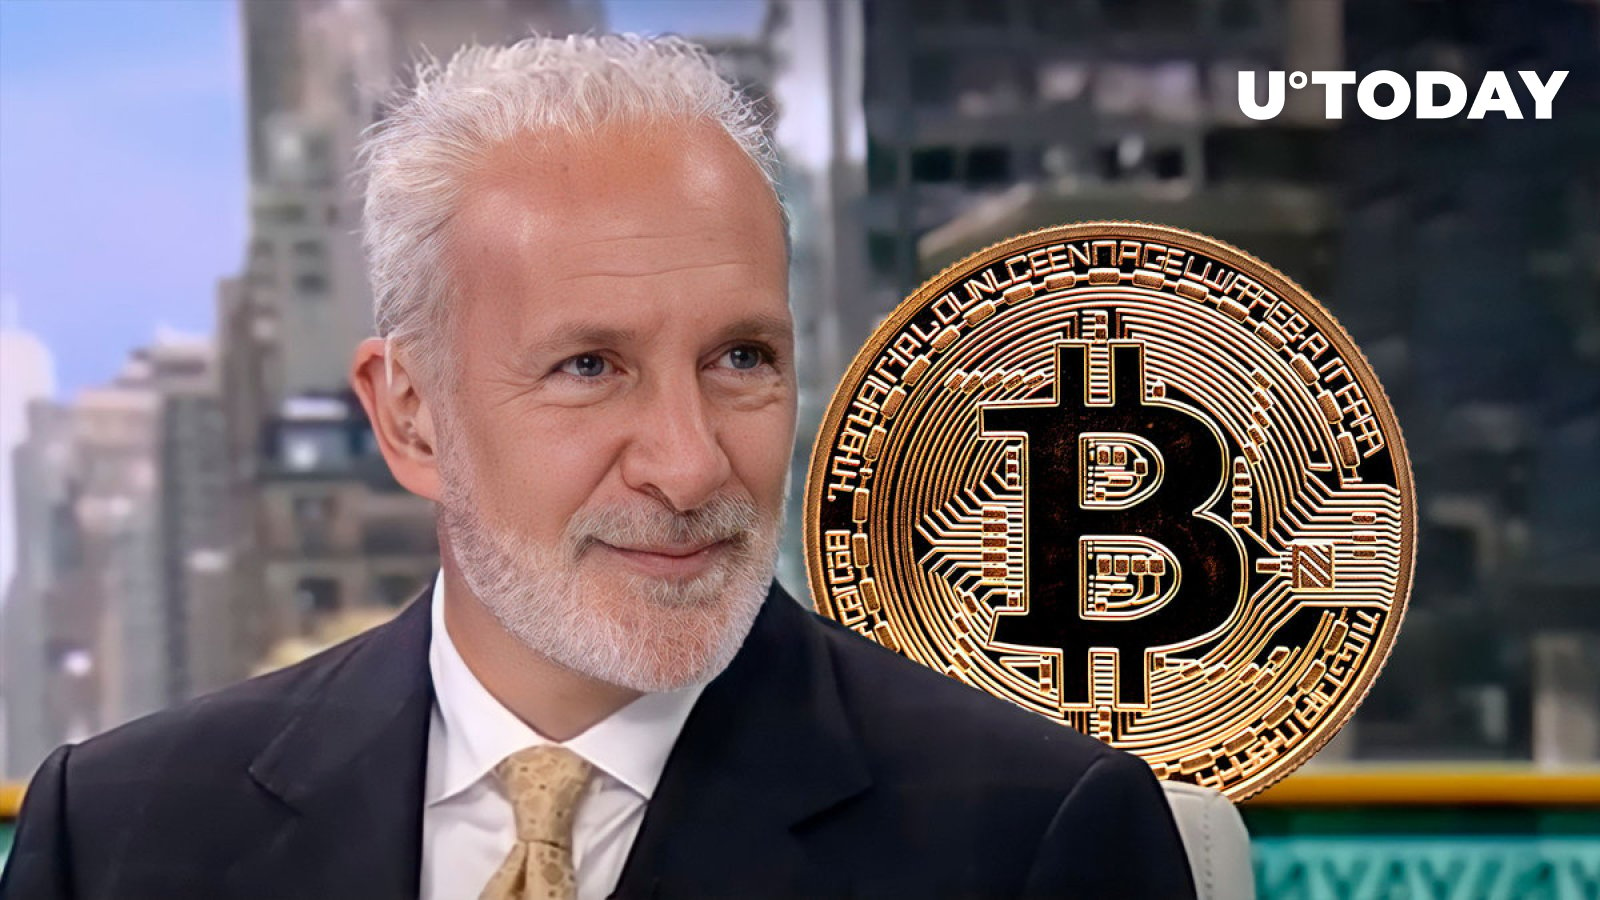 Bitcoin ETF Issuers to Face Legal Nightmare, Peter Schiff Predicts